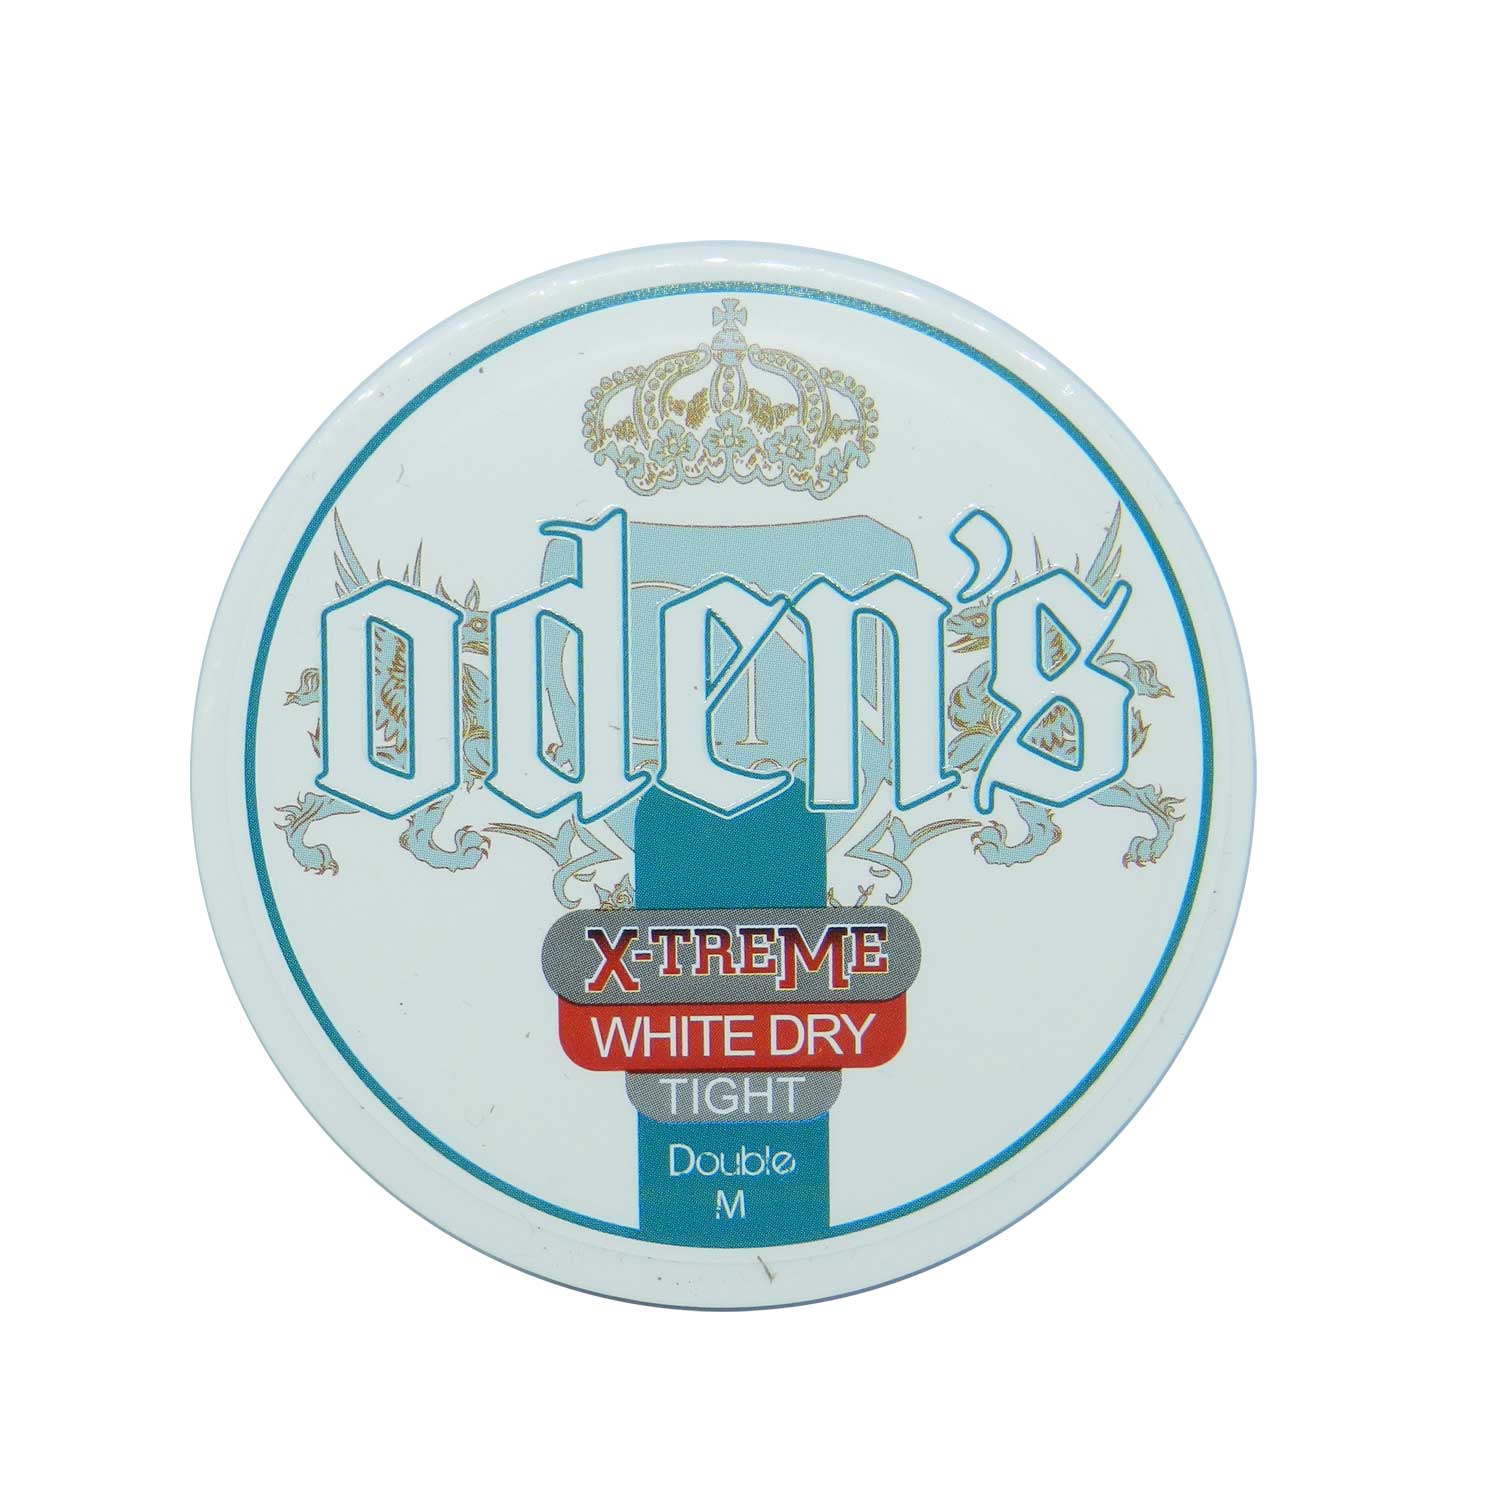 Odens Double M. Extreme White Dry Tight